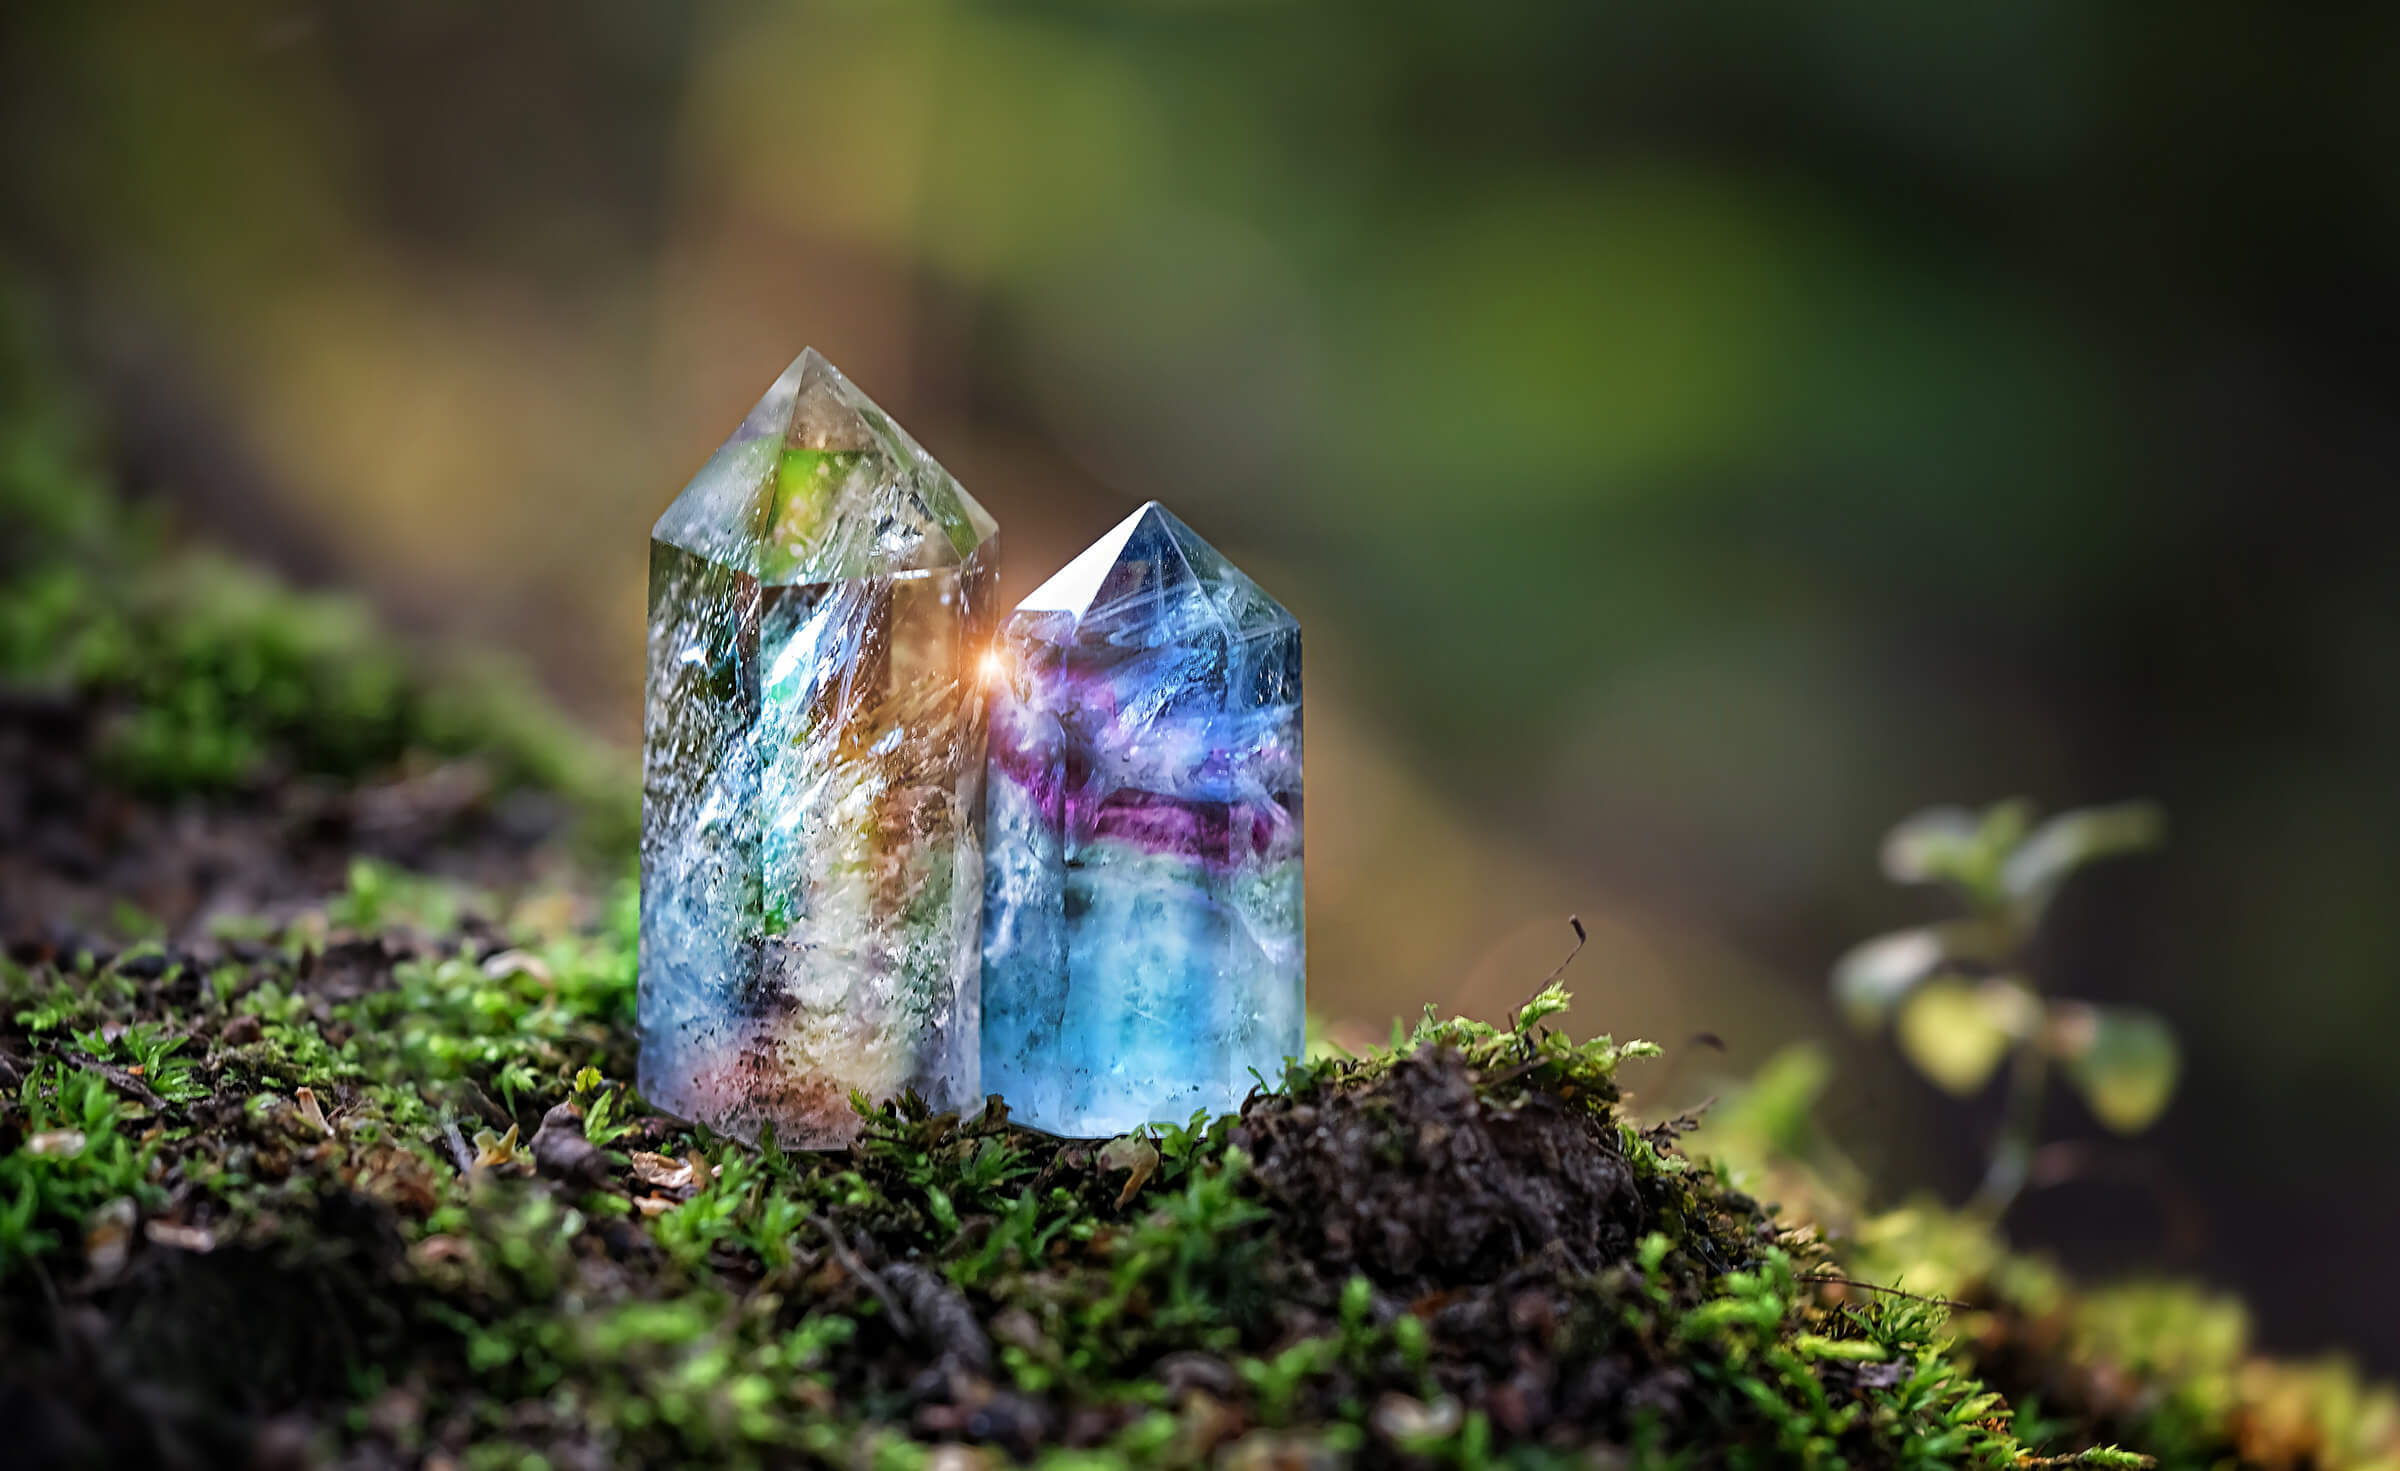 An ethically sourced clear crystal tower is alongside a purple and blue crystal tower in a natural setting